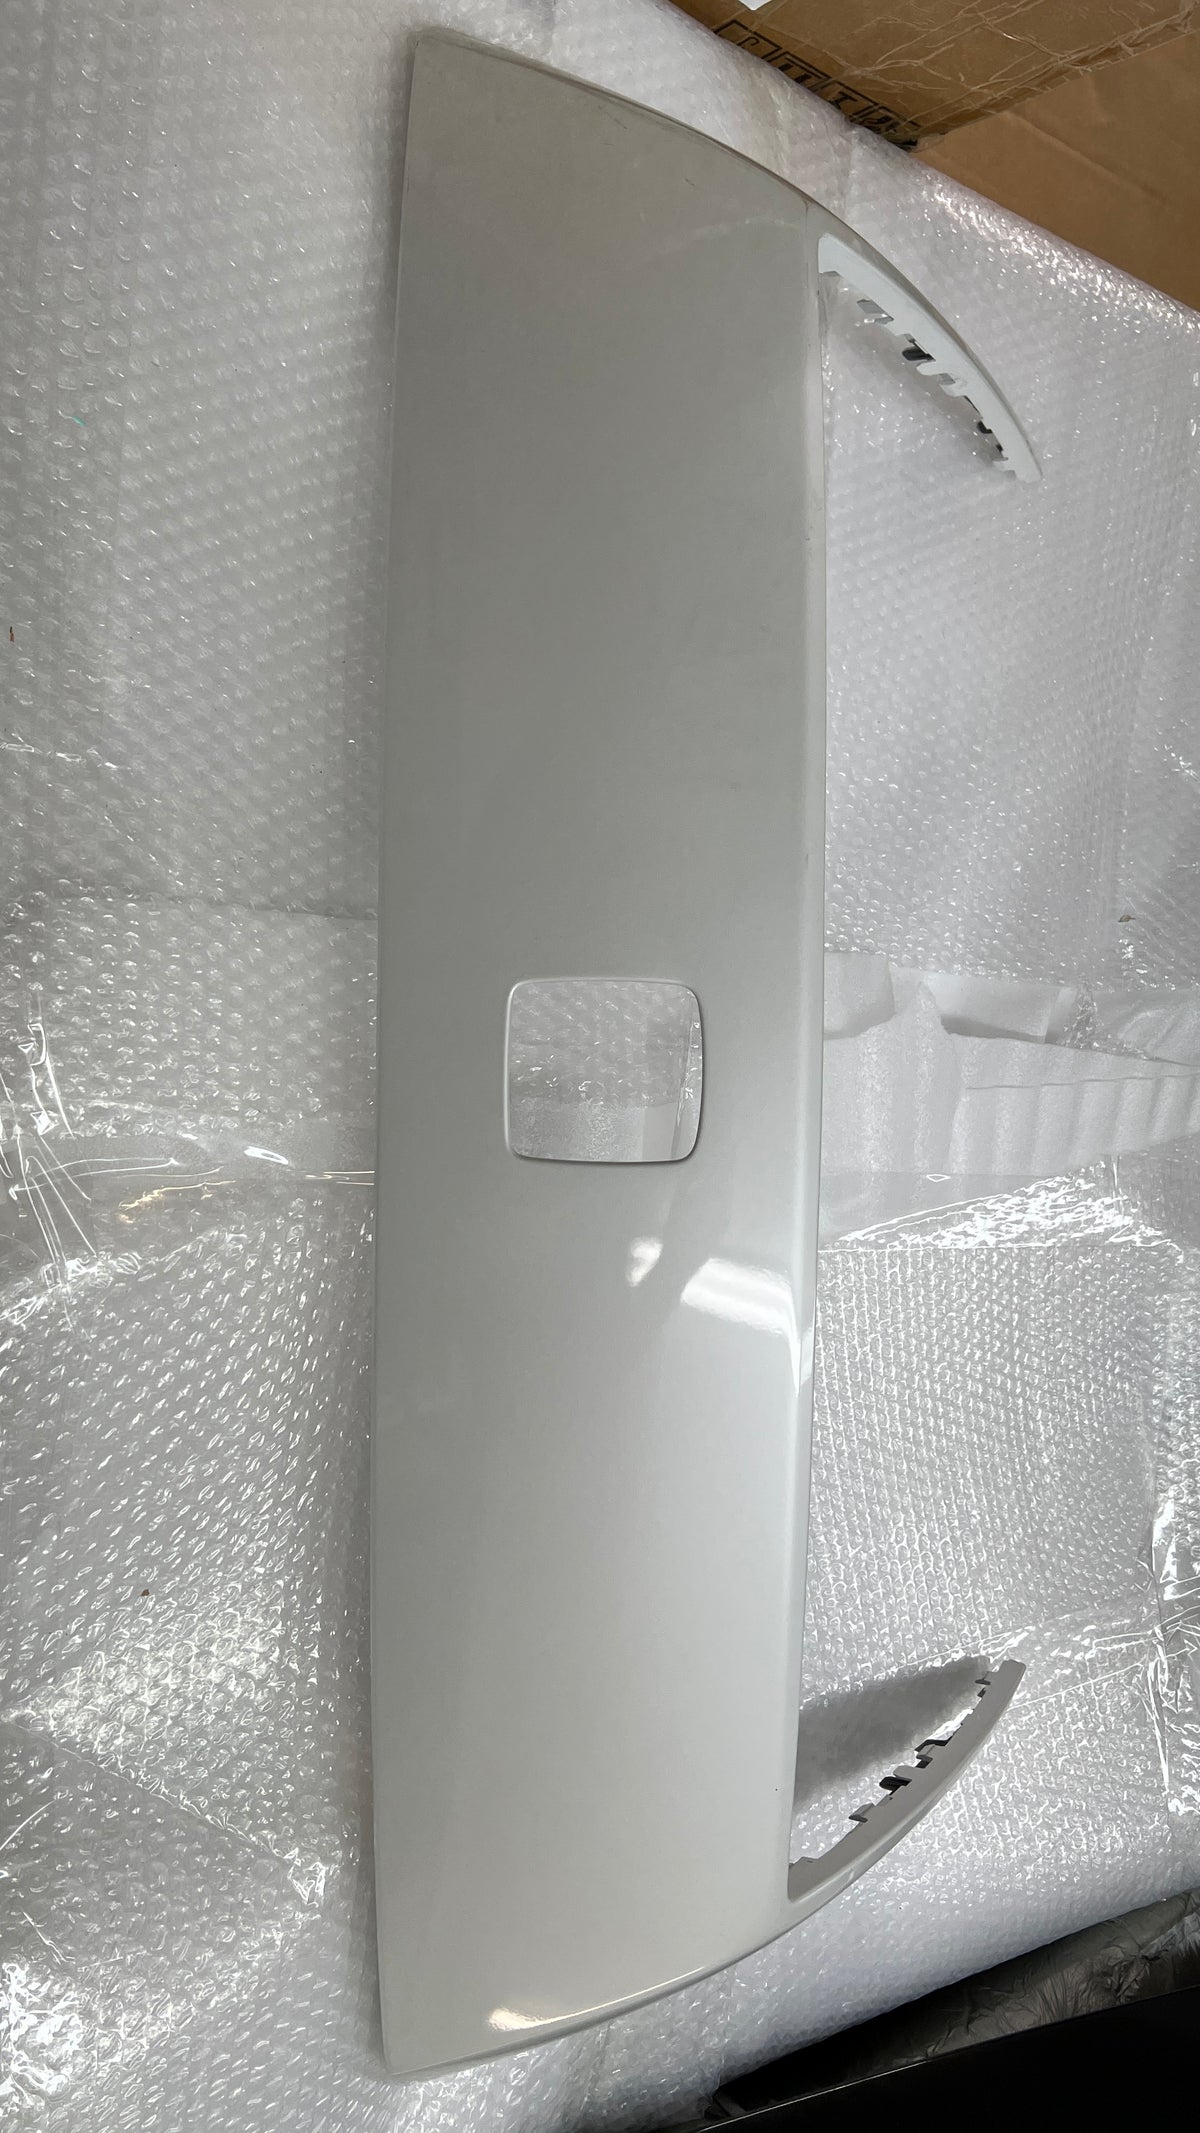 Rolls Royce Dawn Wraith Front Grill cover before facelift model, OEM, Part number: 5111 7301352